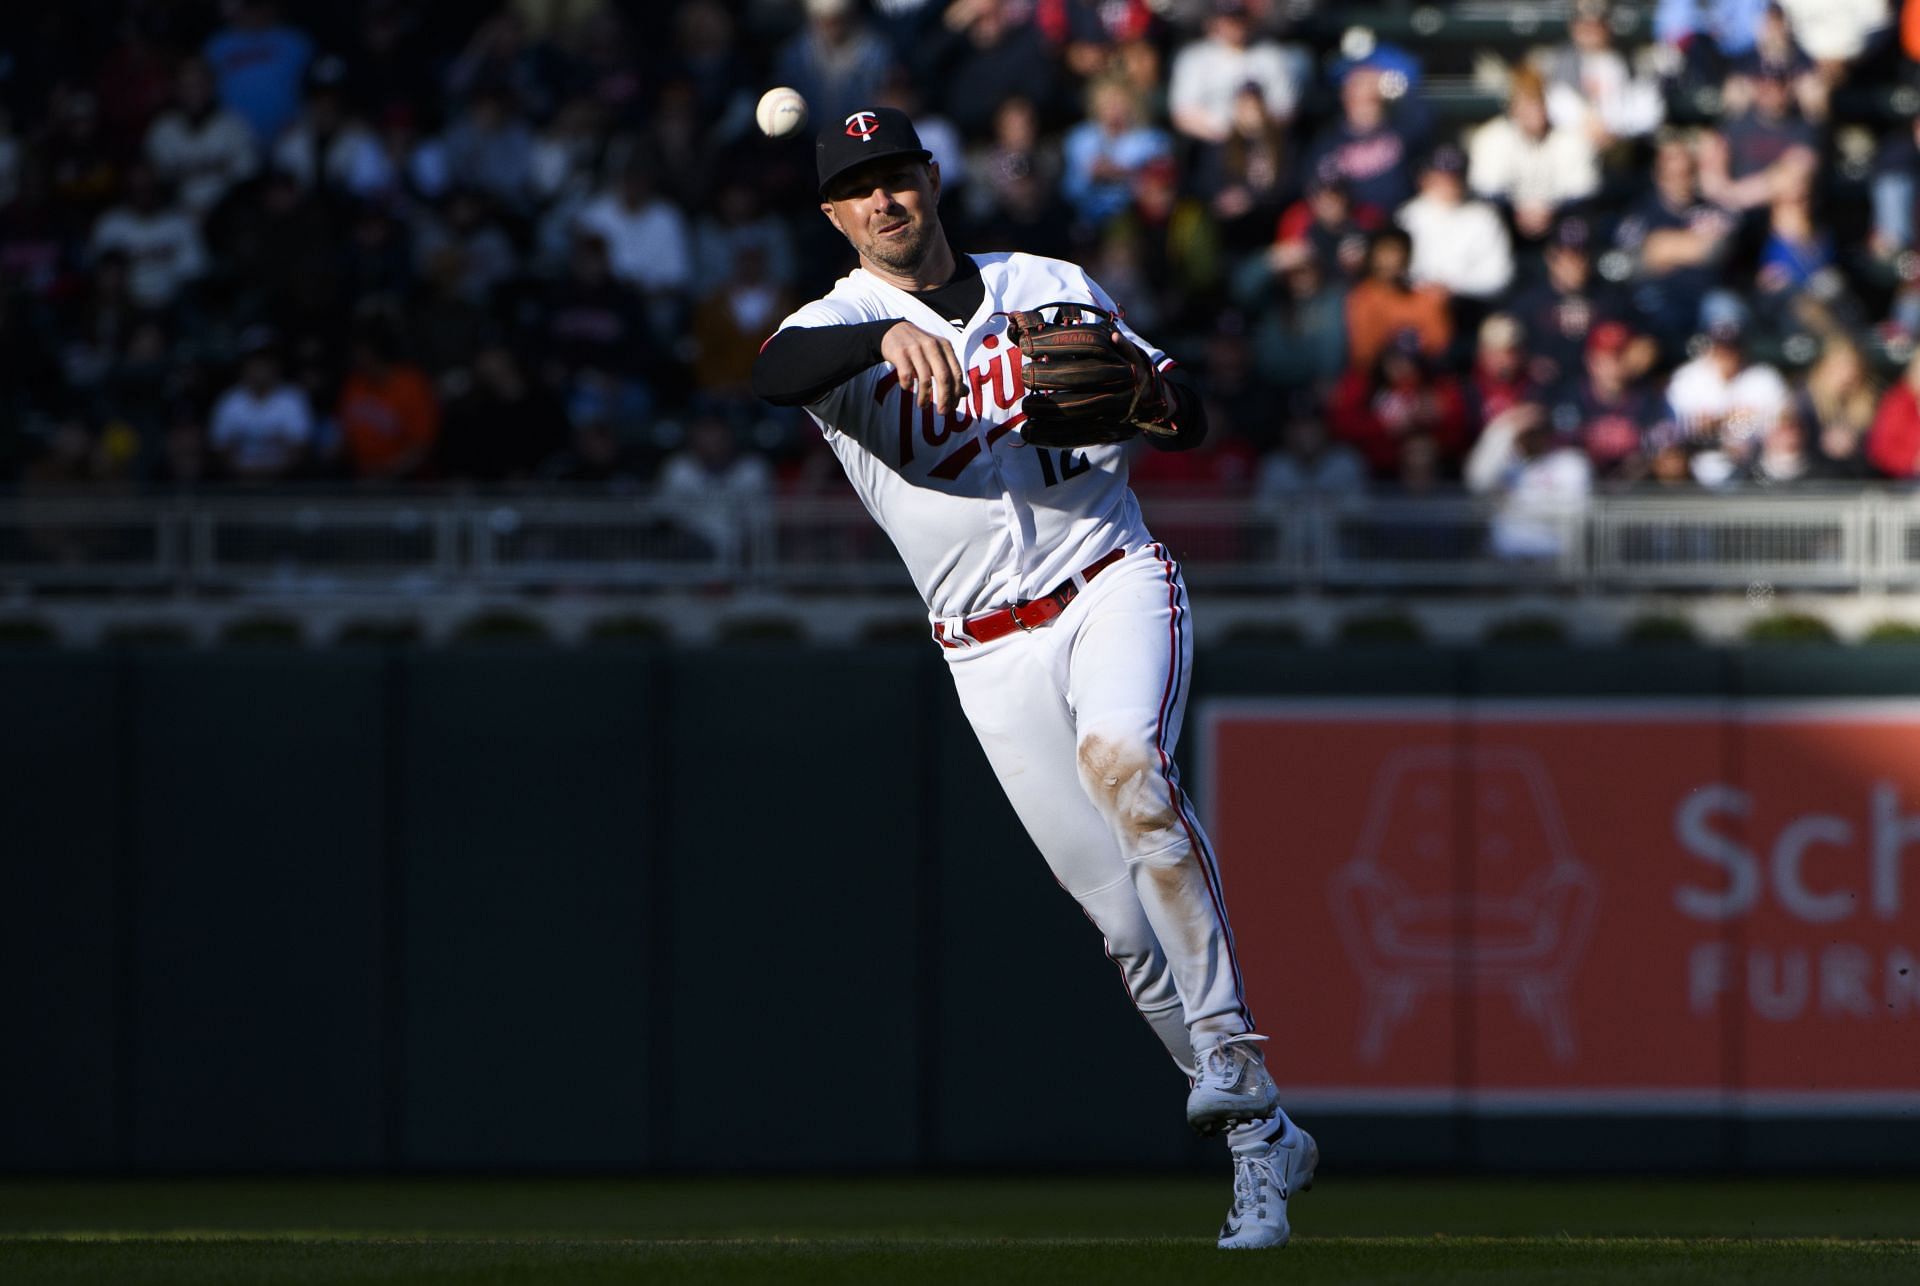 Twins beat White Sox 3-1. Kyle Farmer has surgery on jaw, Byron